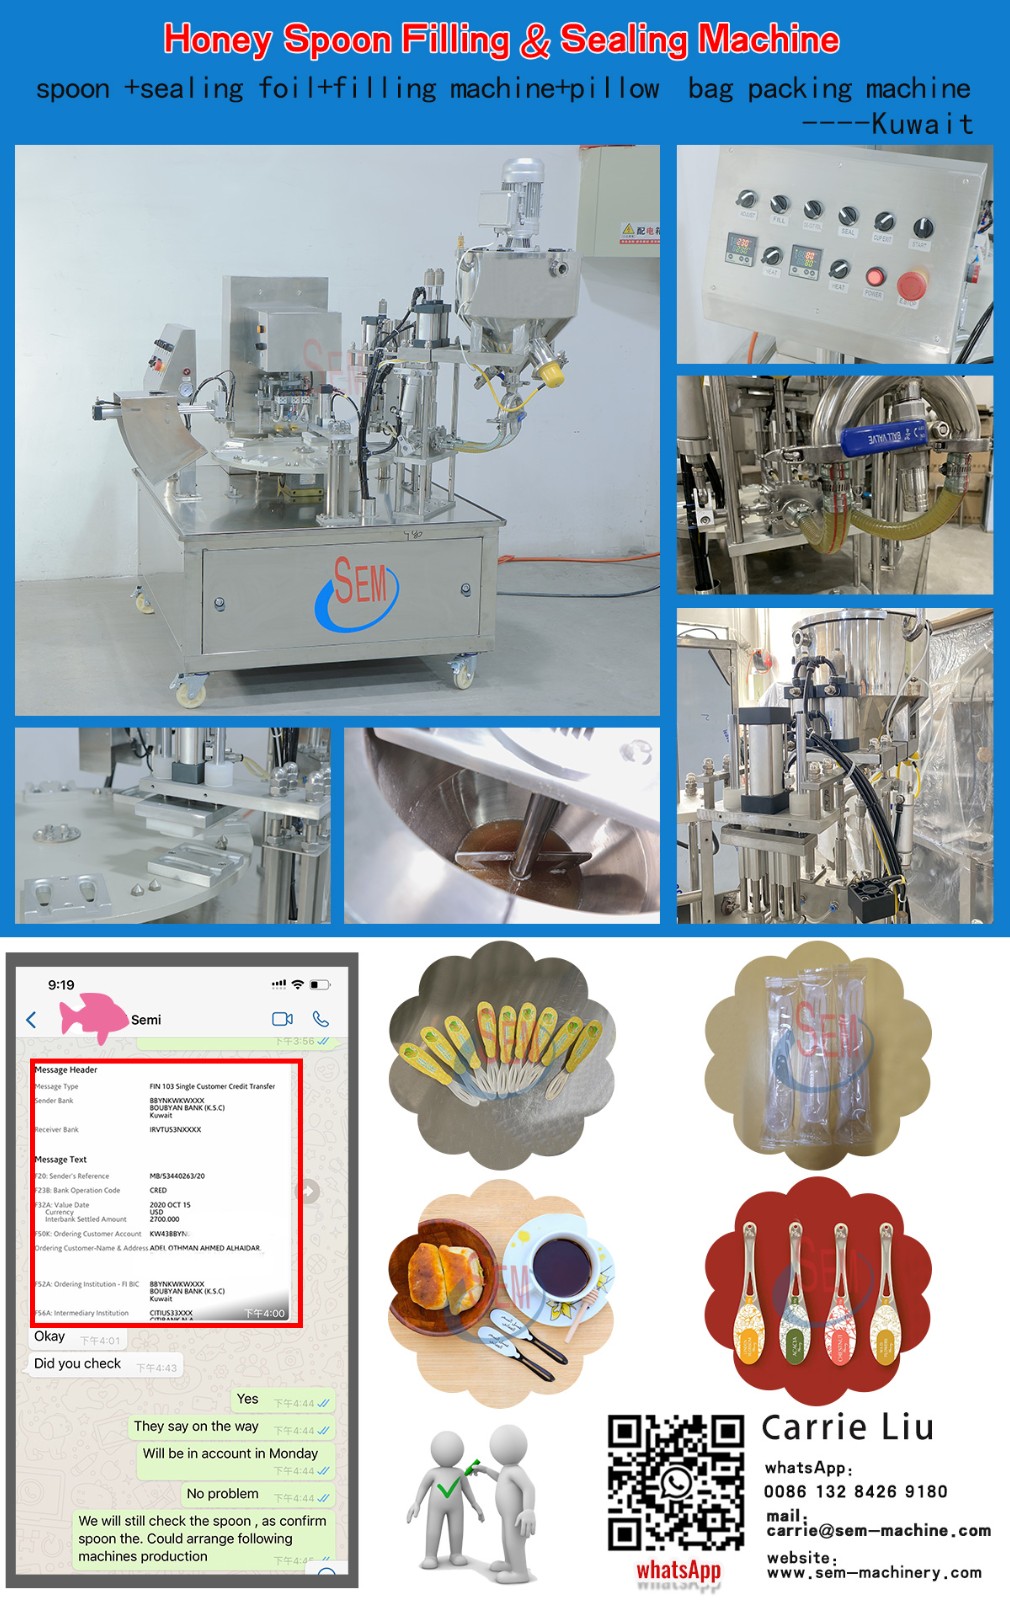 The equipment is a honey spoon filling machine